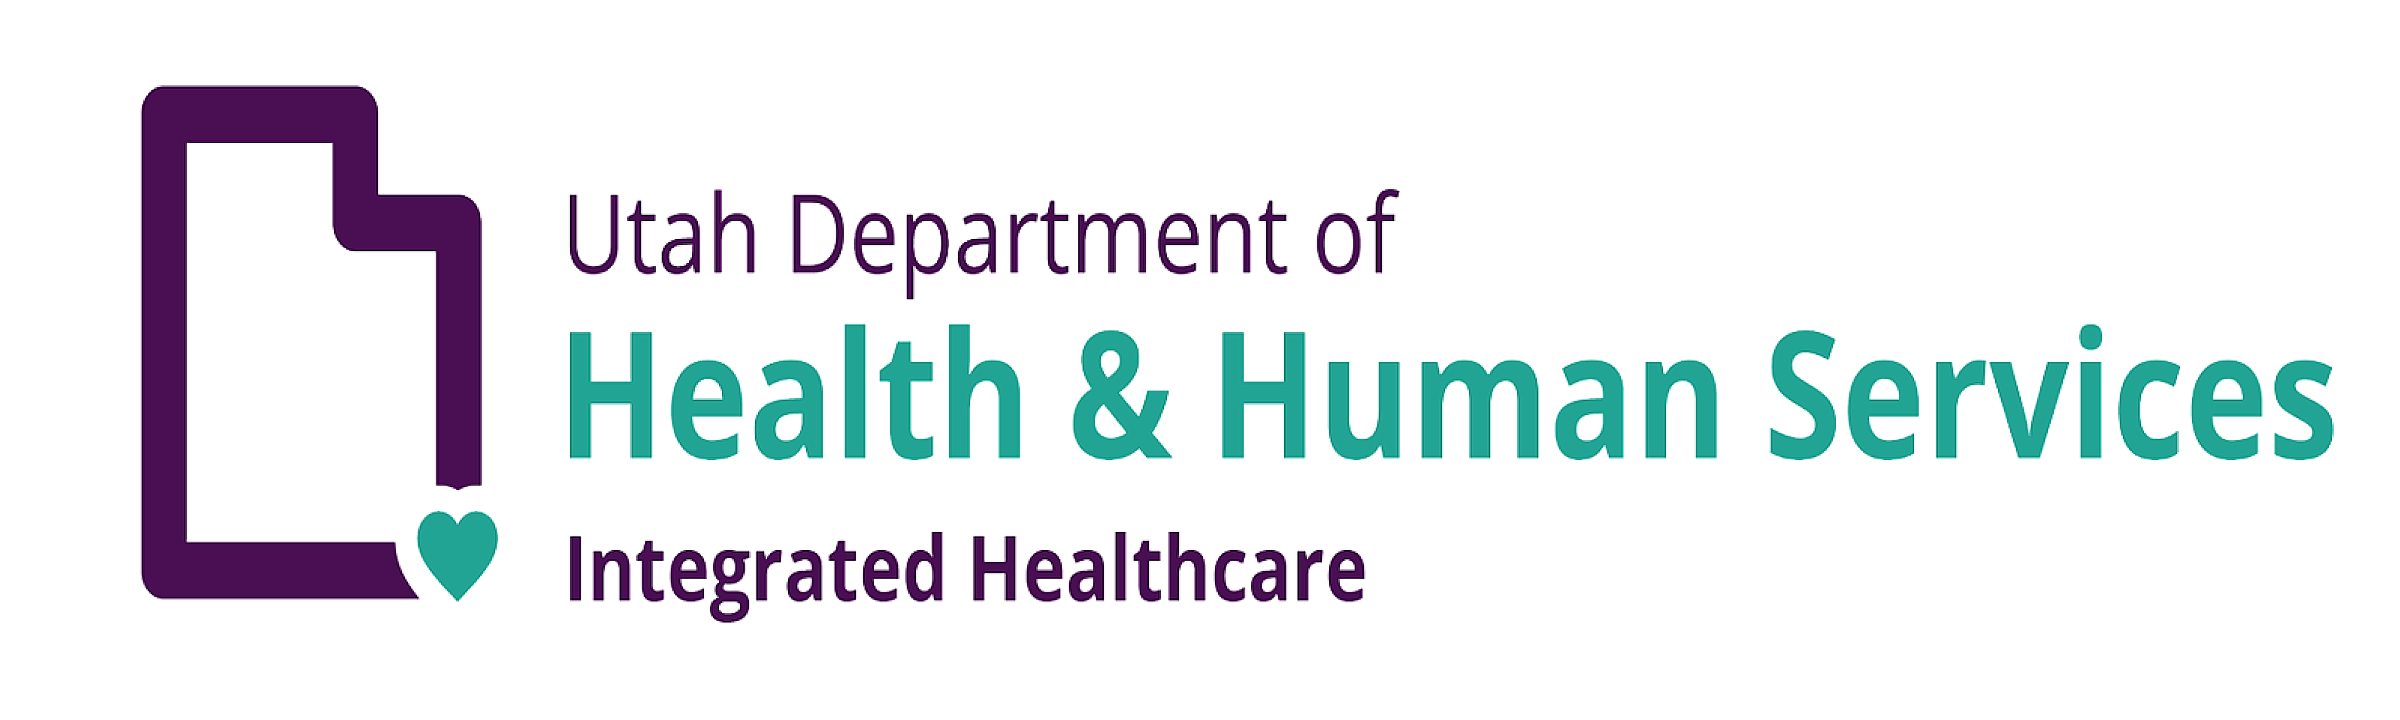 Utah Department of Health and Human Services (Integrated Healthcare) logo